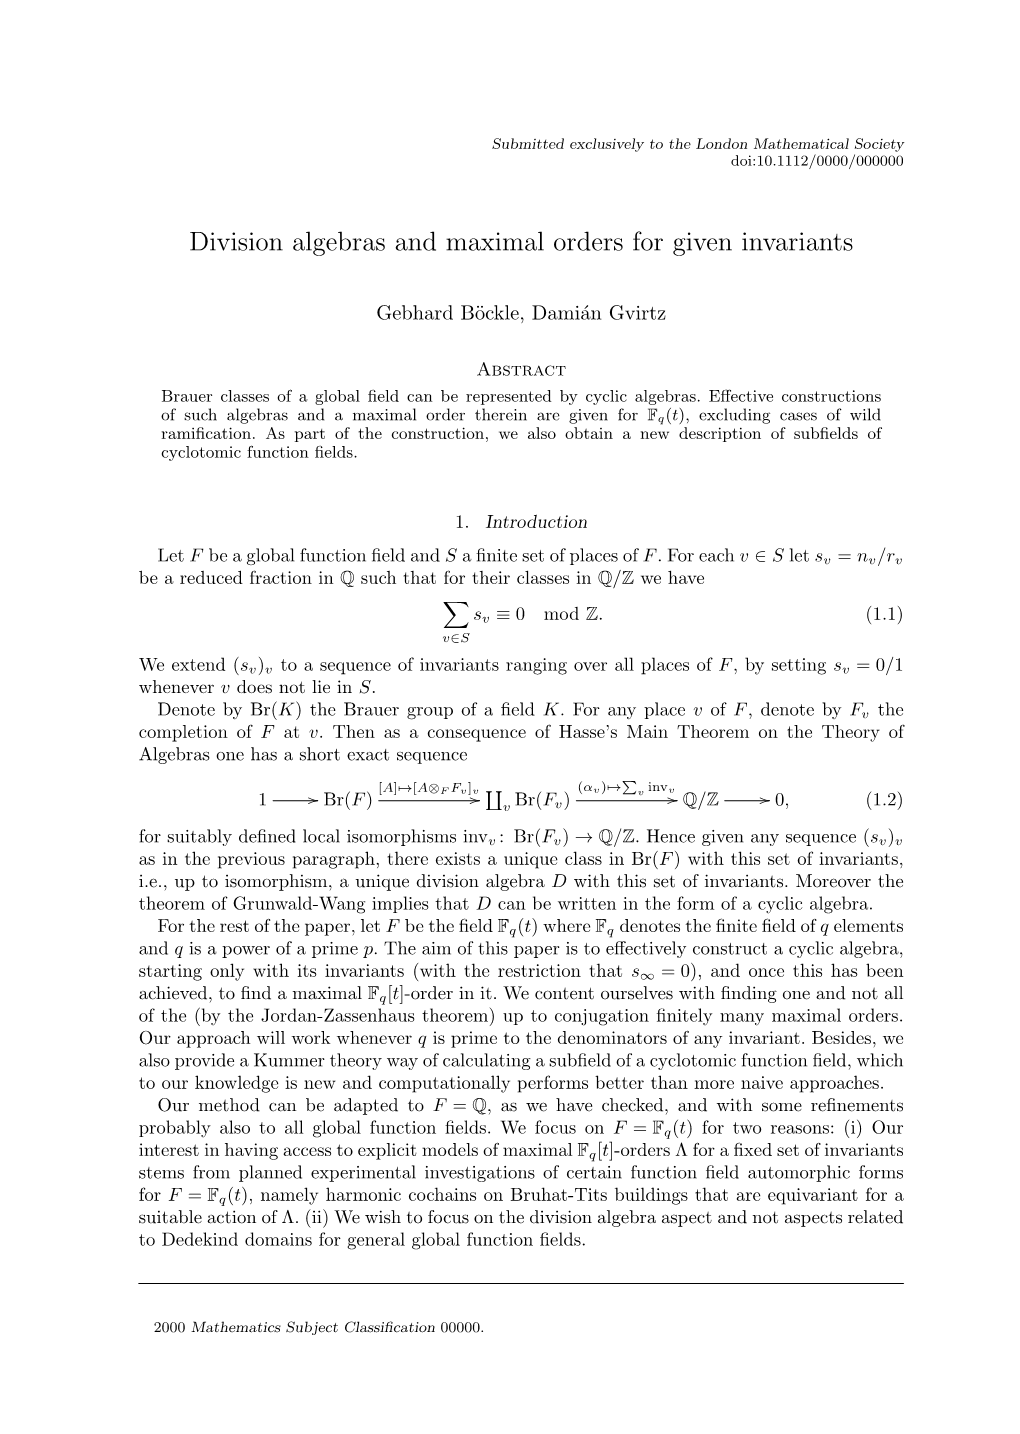 Division Algebras and Maximal Orders for Given Invariants